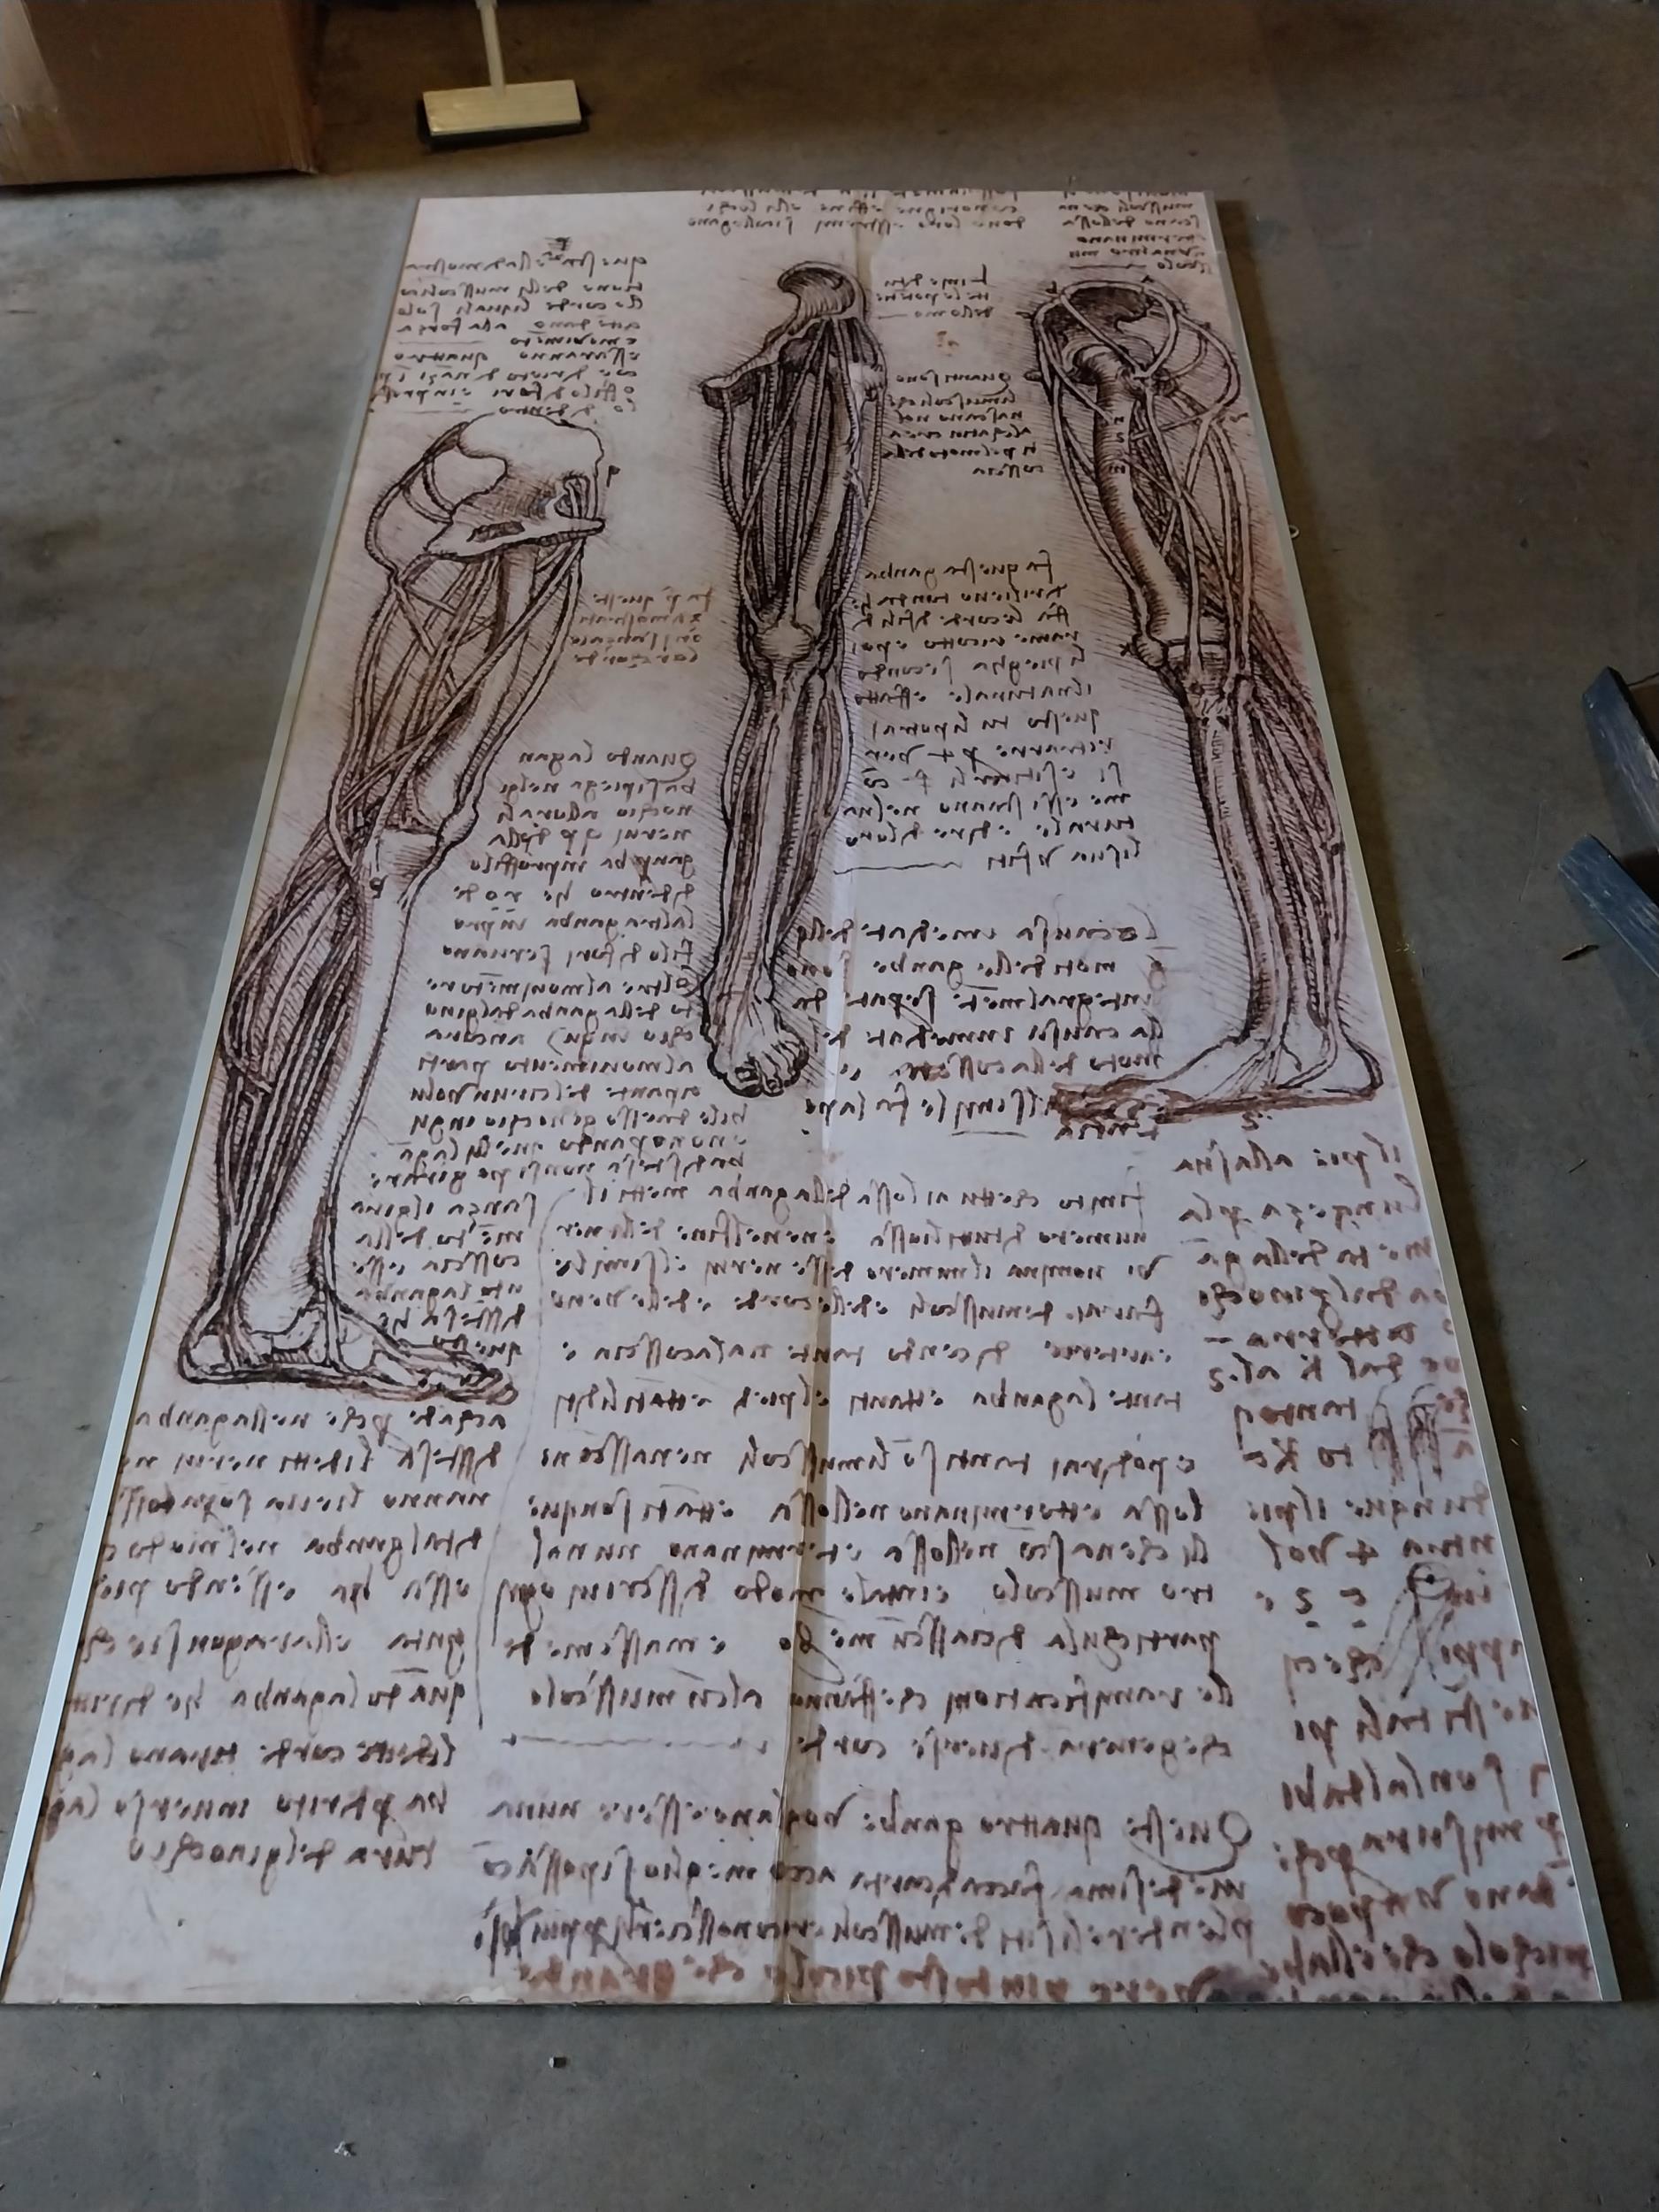 Anatomical wall chart originally from the Royal College of Surgeons{240 cm H x 121 cm W x 2 cm D}.